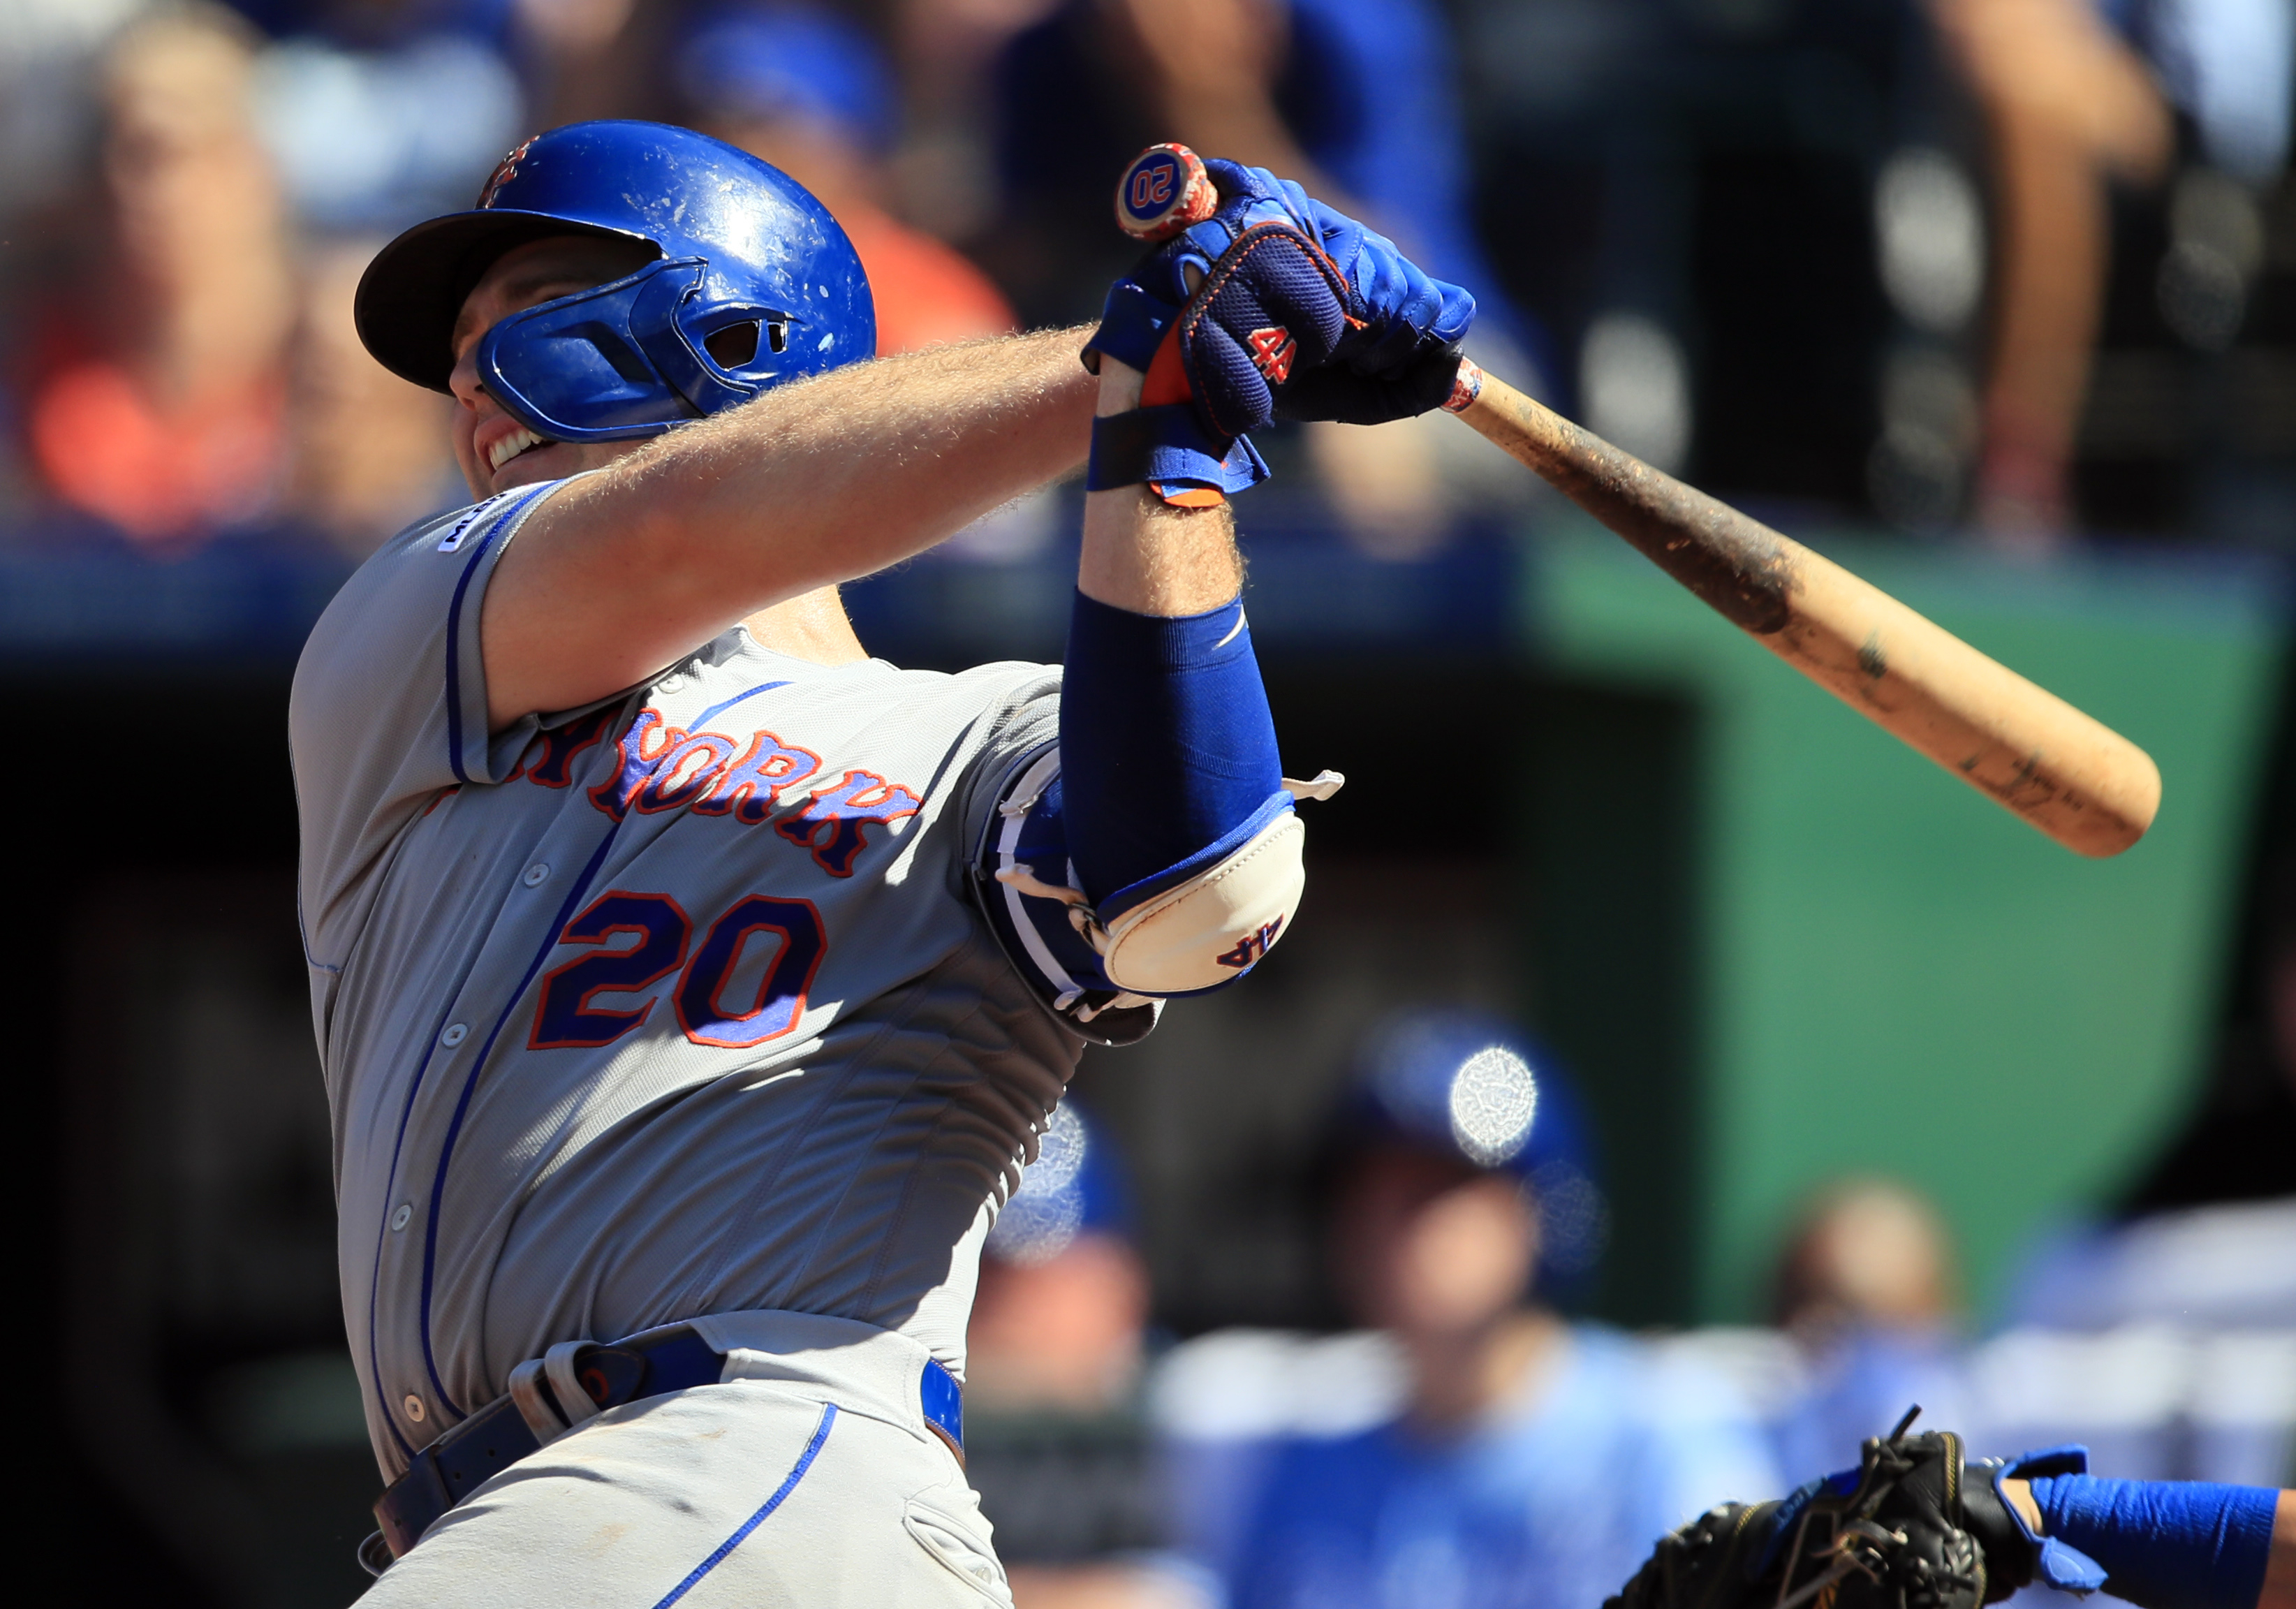 Alonso breaks NL rookie HR record, Mets crown Royals 11-5